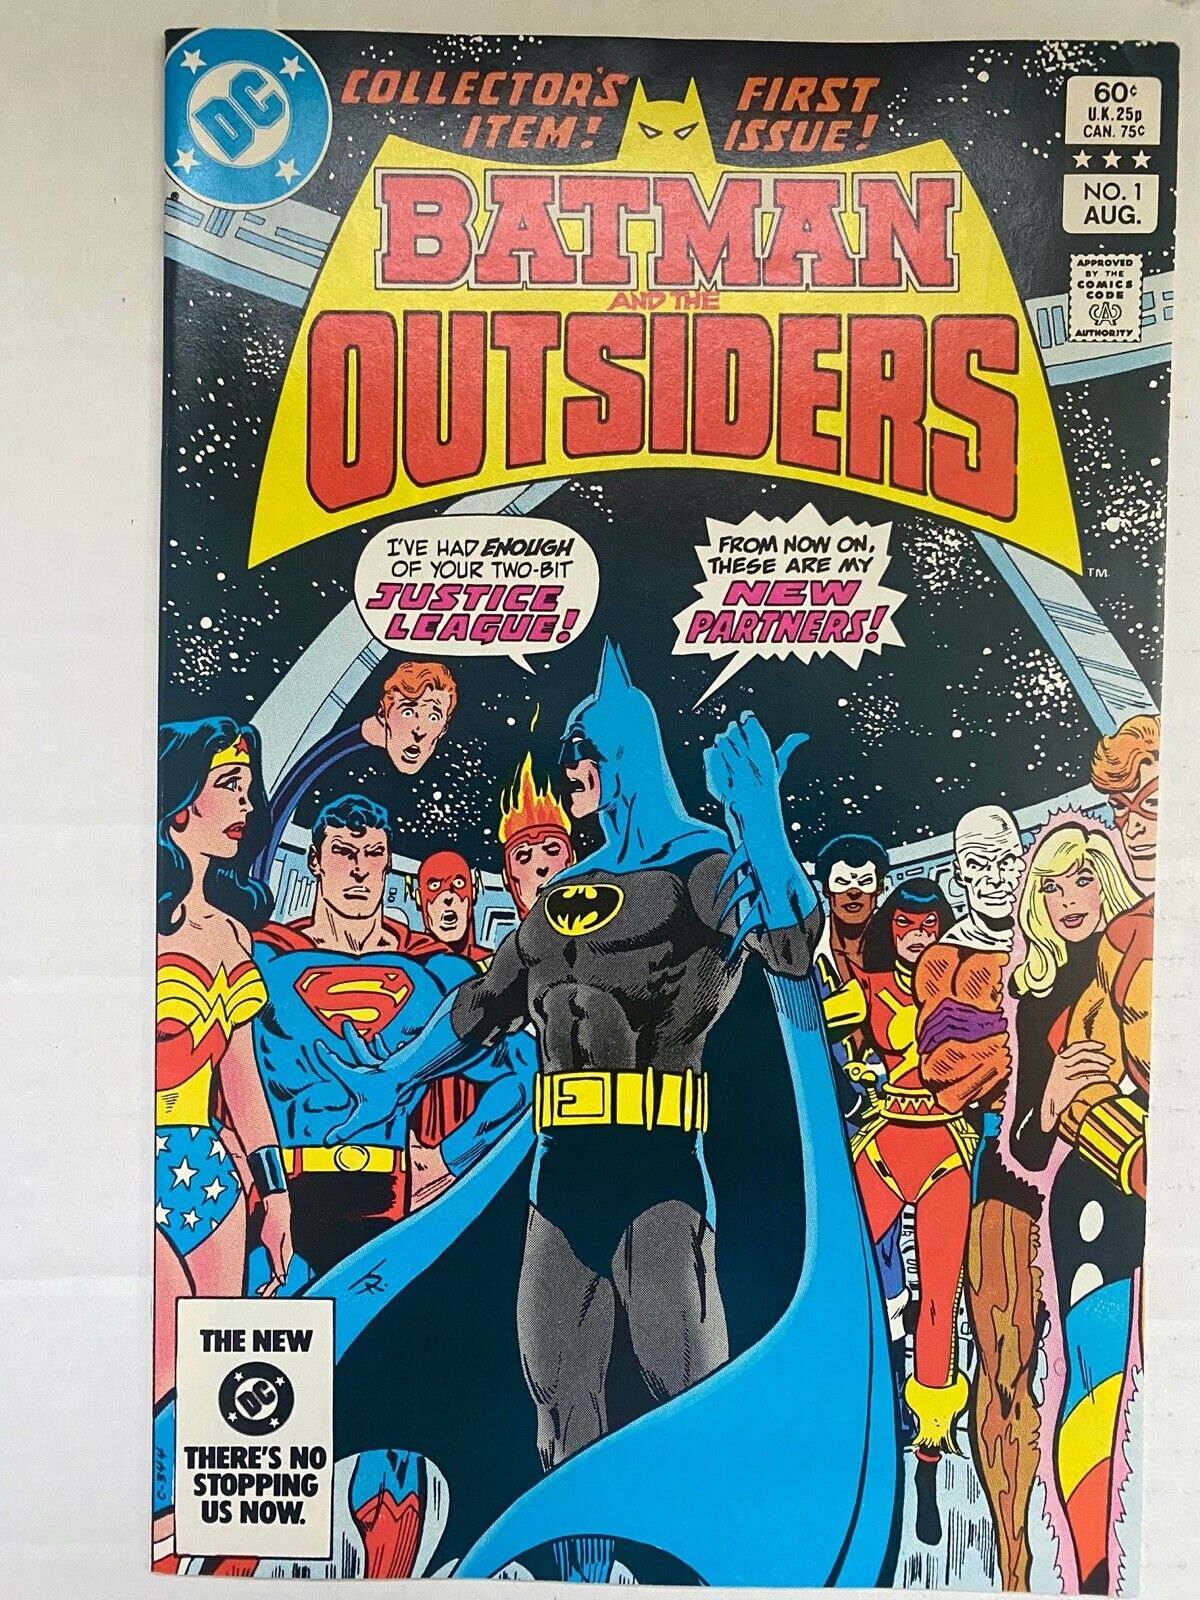 BATMAN AND THE OUTSIDERS #1 *Near Mint* Wars Ended… Wars Begun 1983 DC COMICS